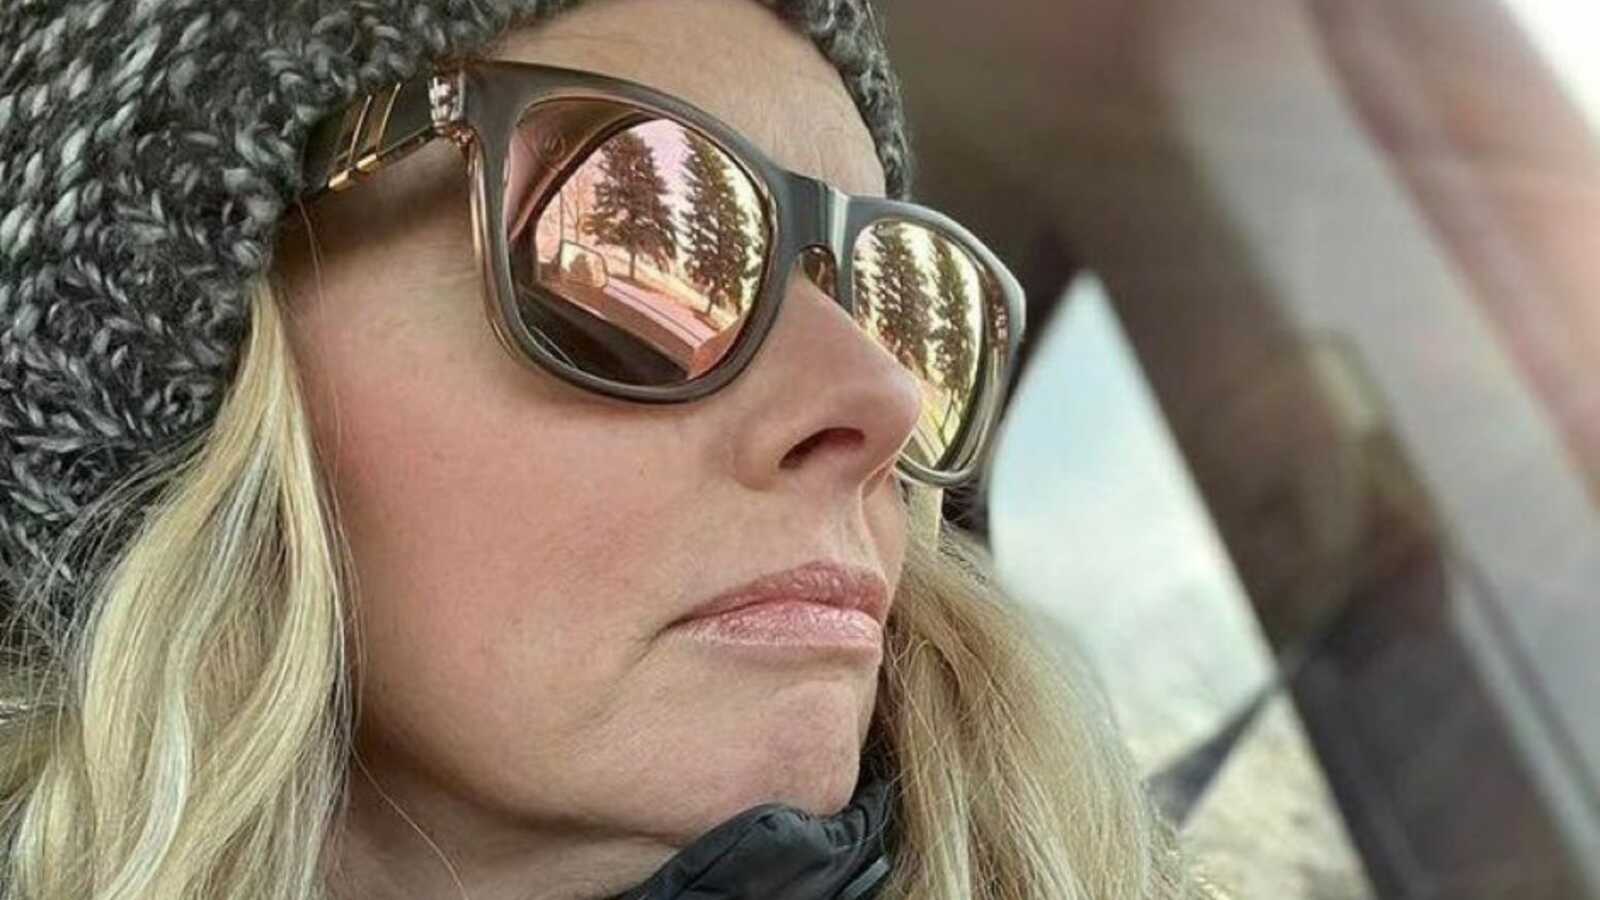 Woman reflecting on life's journey takes a moody selfie in the car